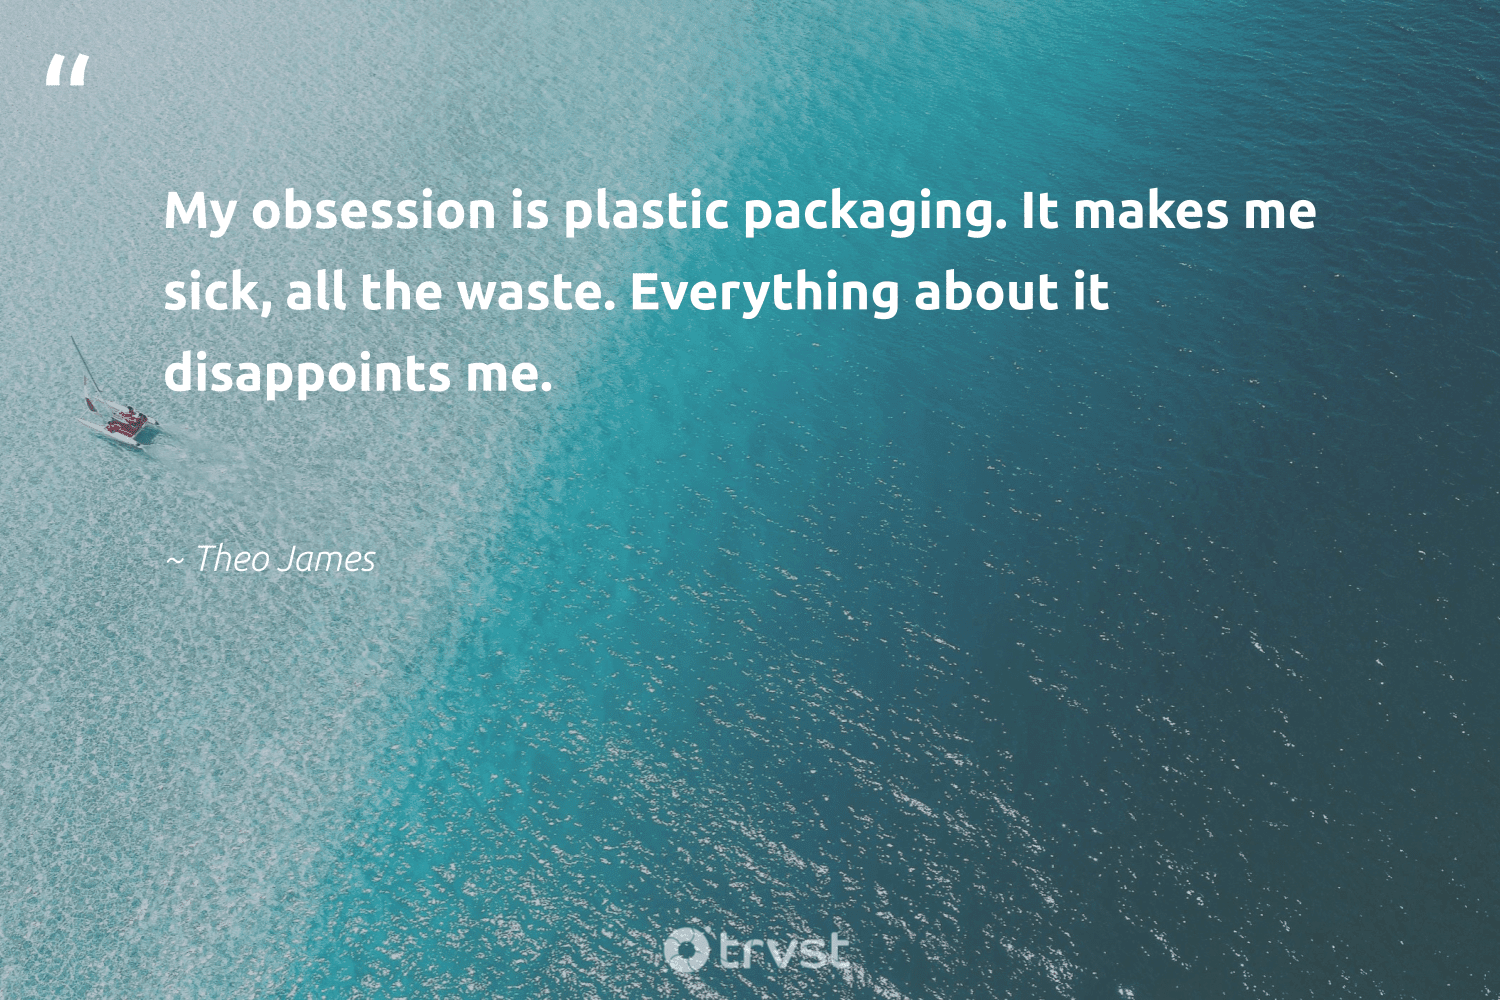 33 Plastic Pollution Quotes Provoking Action and Awareness